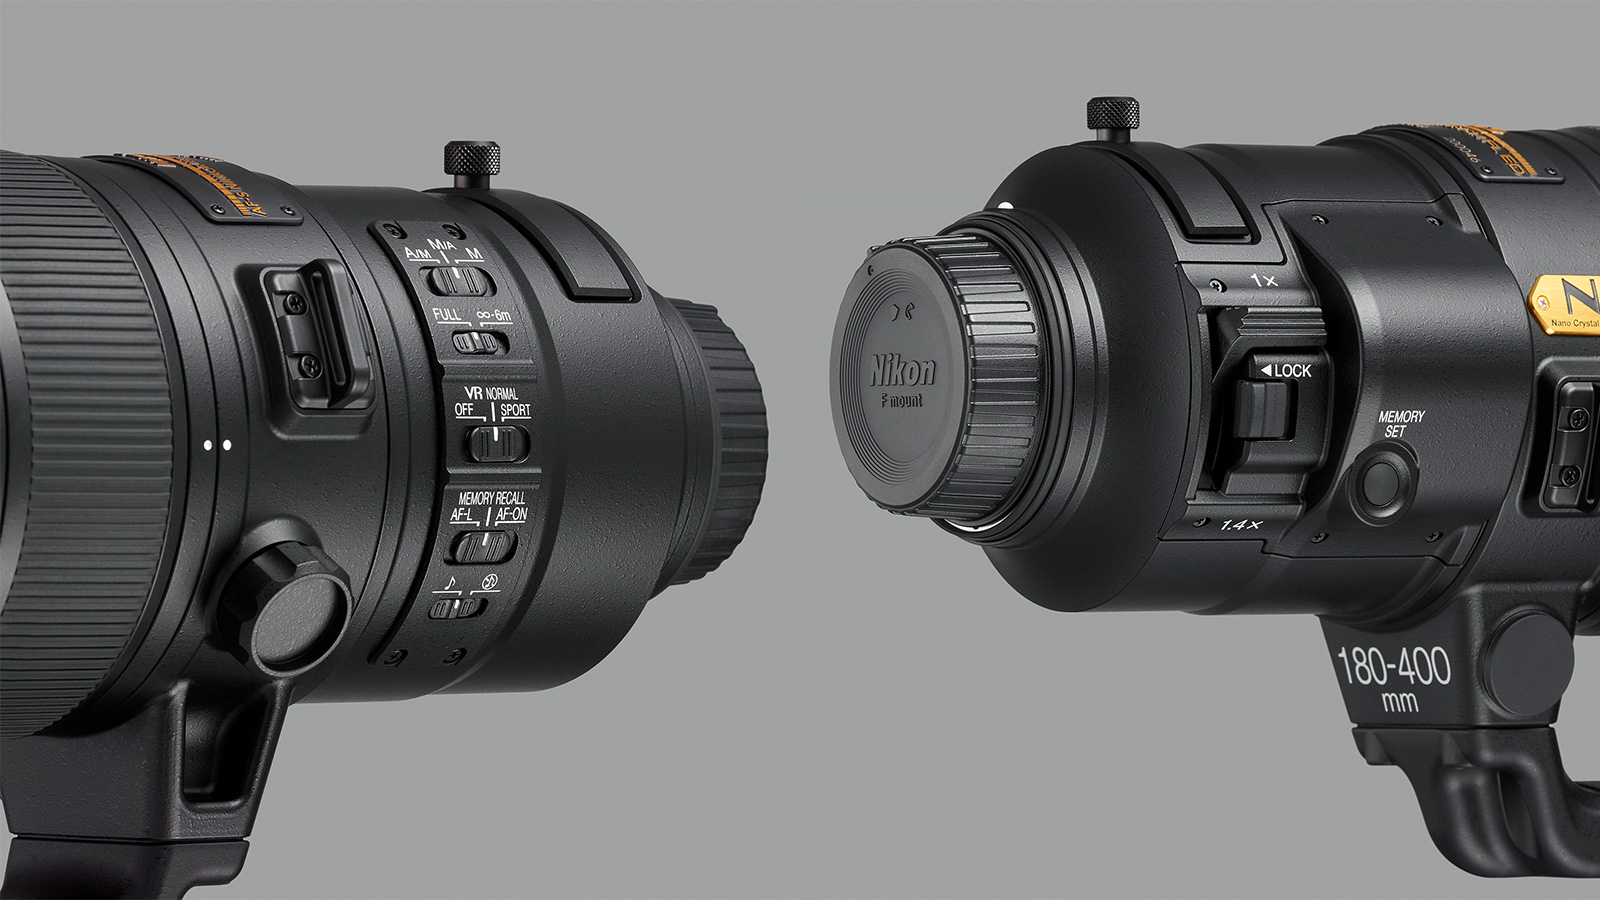 Nikon's latest super-telephoto lens is their first with a built-in 1.4x teleconverter.